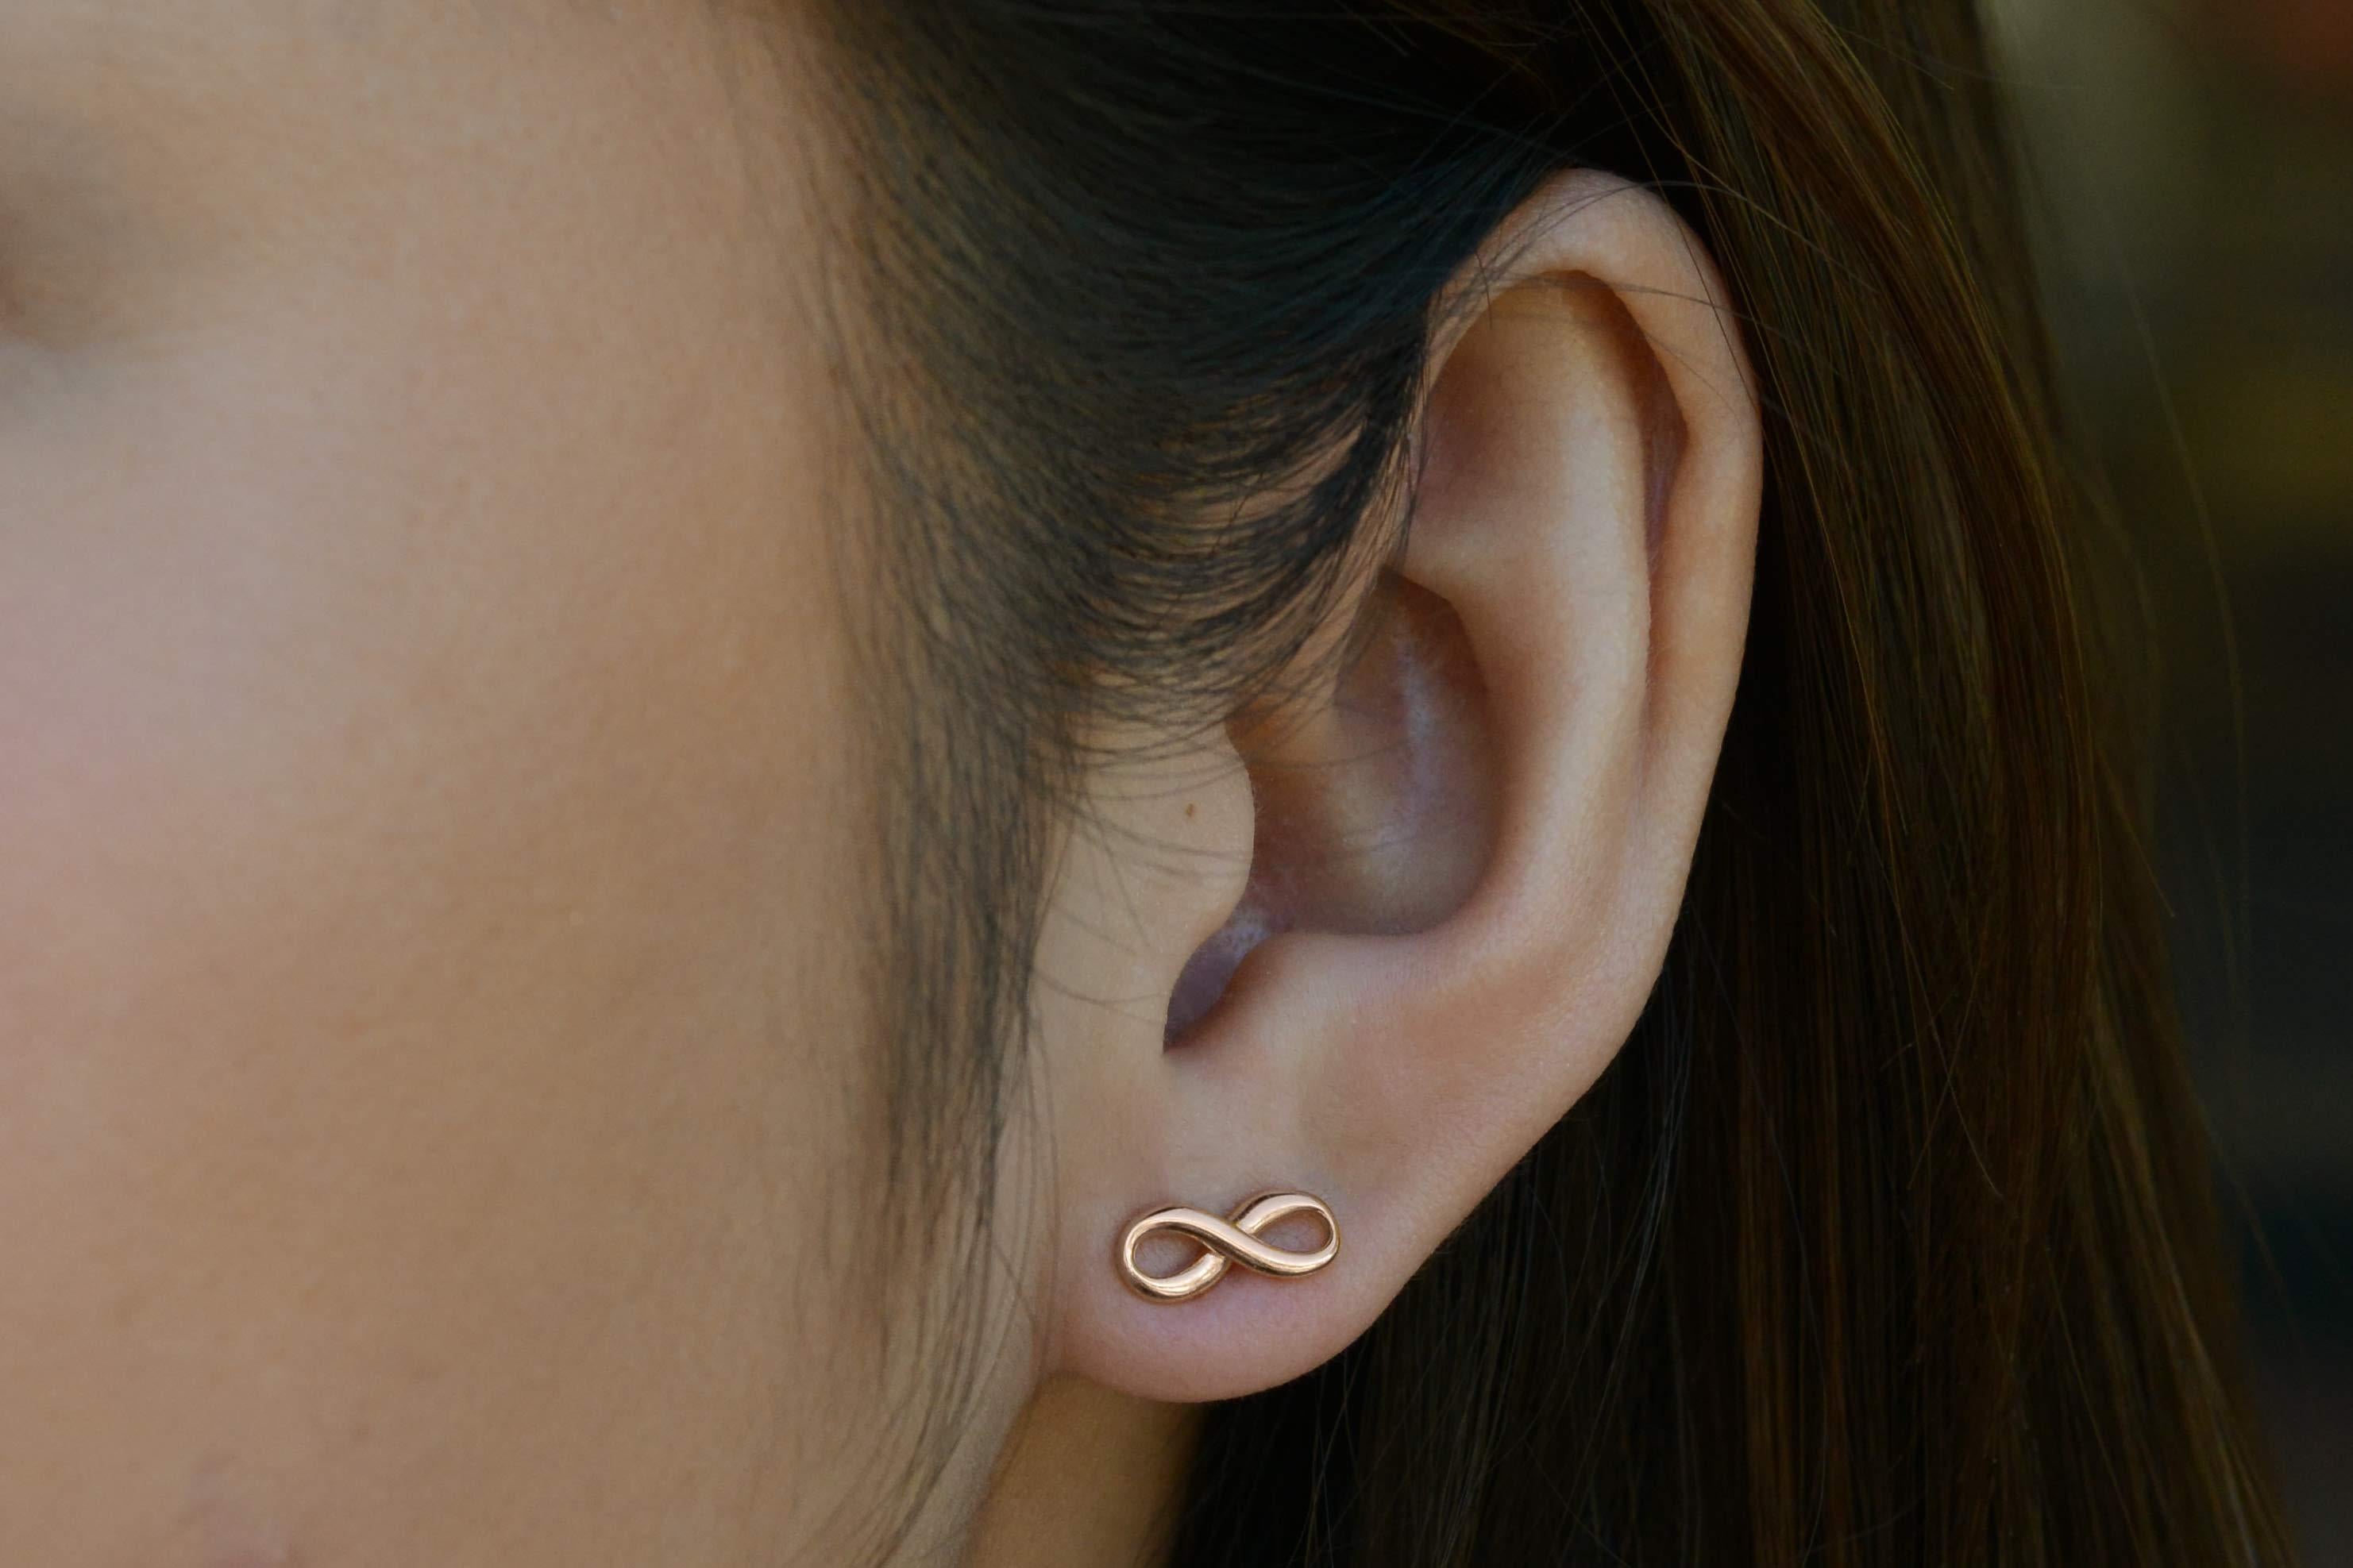 A darling pair of Tiffany & Co. Infinity studs. These earrings are finely crafted out of 18k rose gold with a lovely blush patina. Can be worn horizontally or vertically, this design is retired and is no longer available in Tiffany boutiques. See